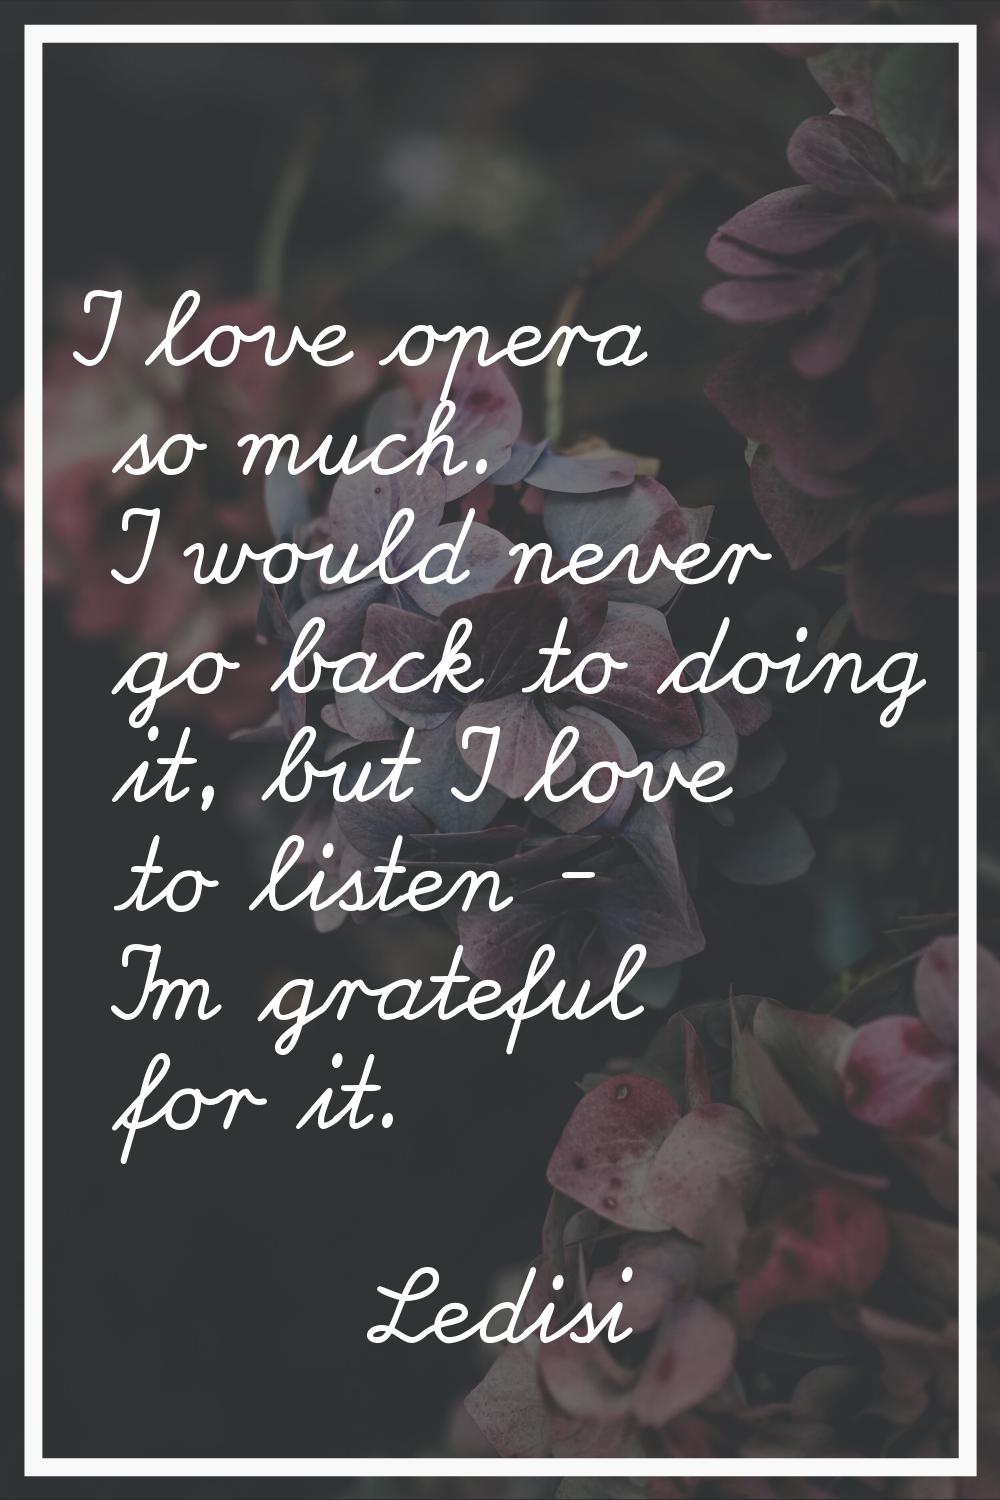 I love opera so much. I would never go back to doing it, but I love to listen - I'm grateful for it